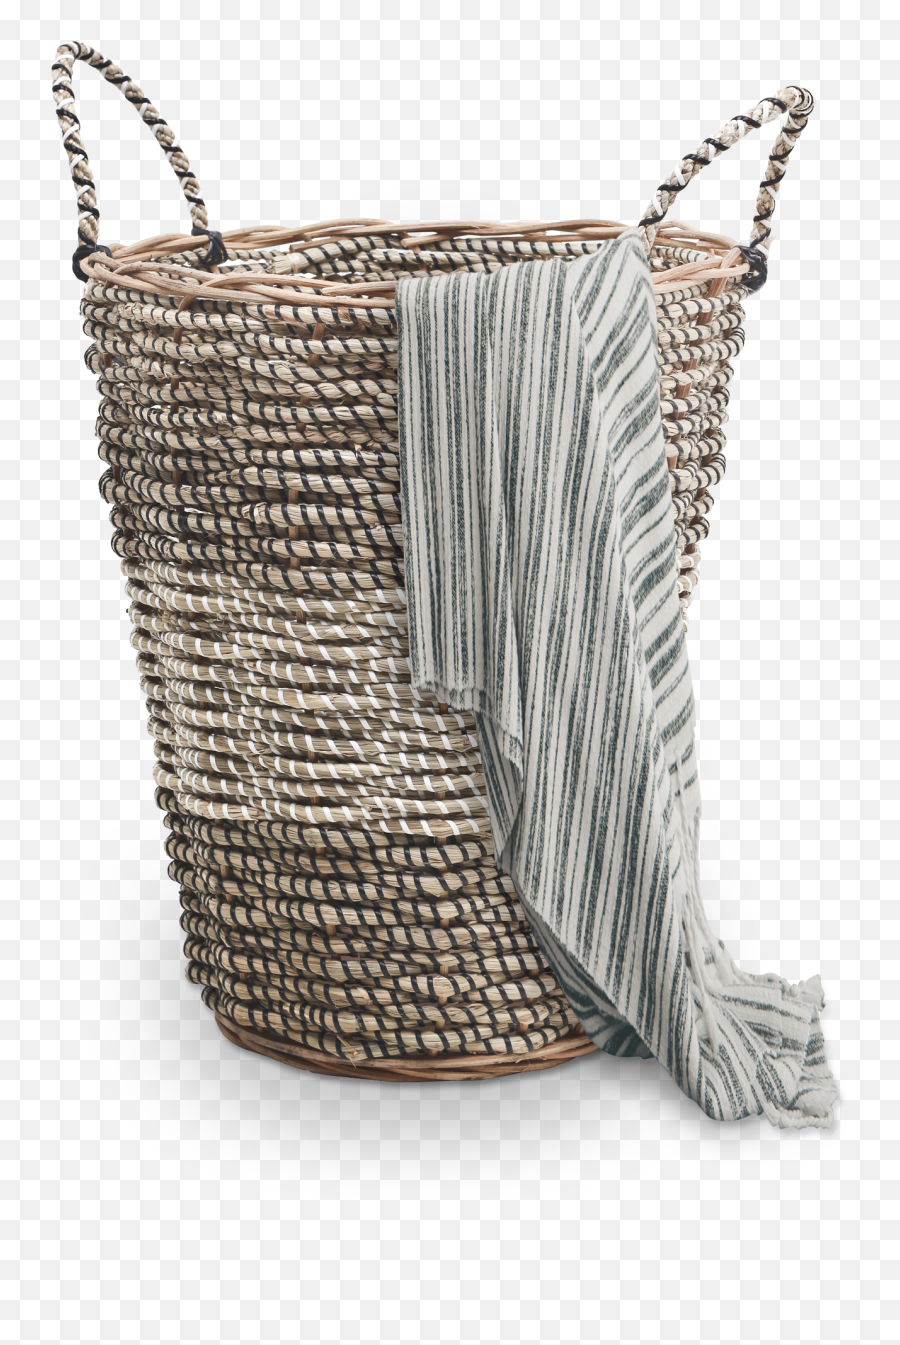 Storagedoctor Water - Hyacinth Seagrass Baskets 50l Laundry Hamper With Handle Hand Woven 16 X 10 X 20 Emoji,Laundry Basket Png